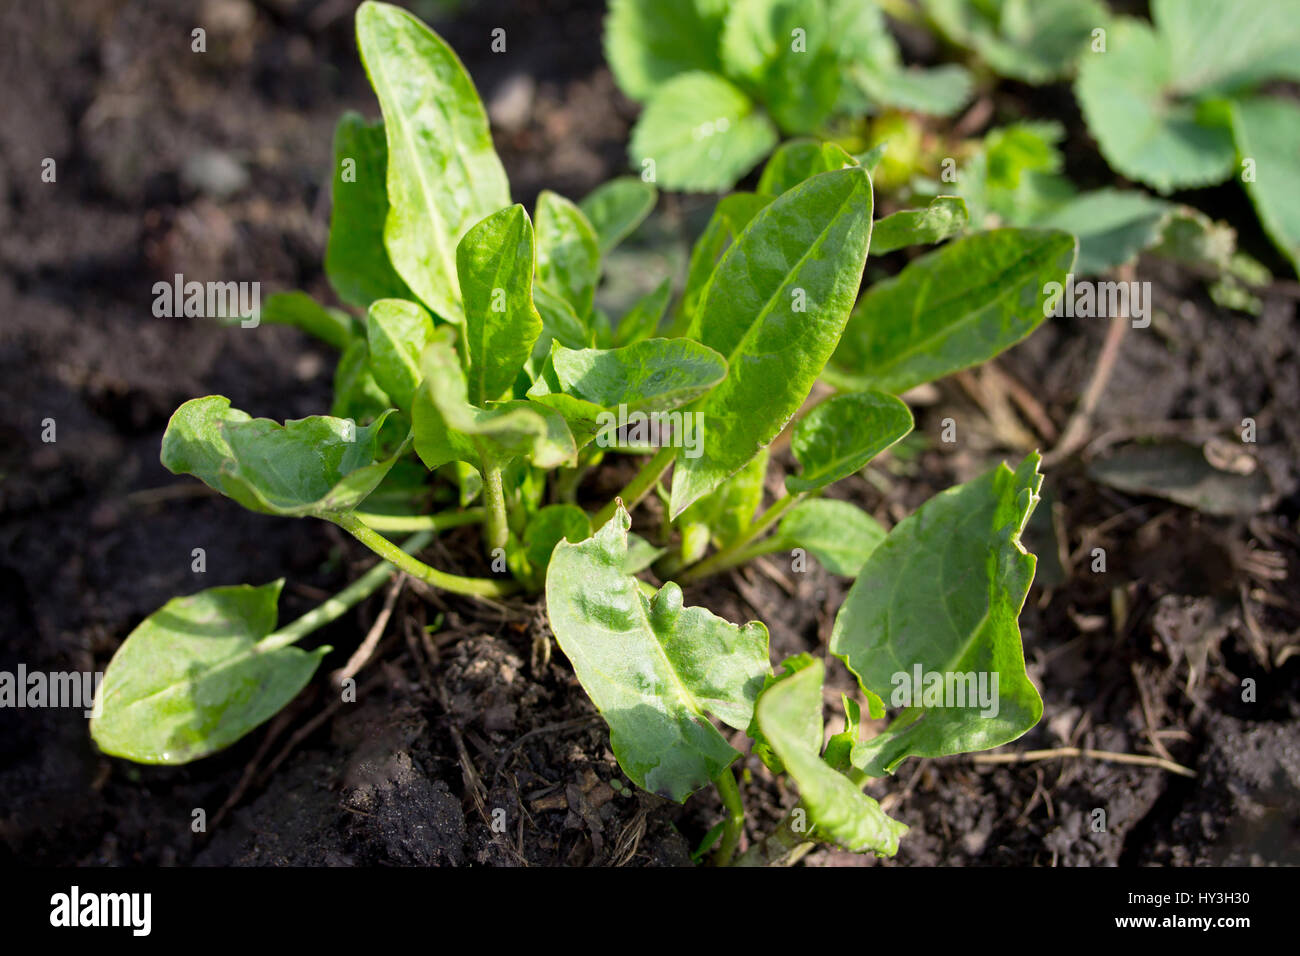 Home vegetable sorrel (Rumex acetosa) on a vegetable plantation in the garden. Stock Photo